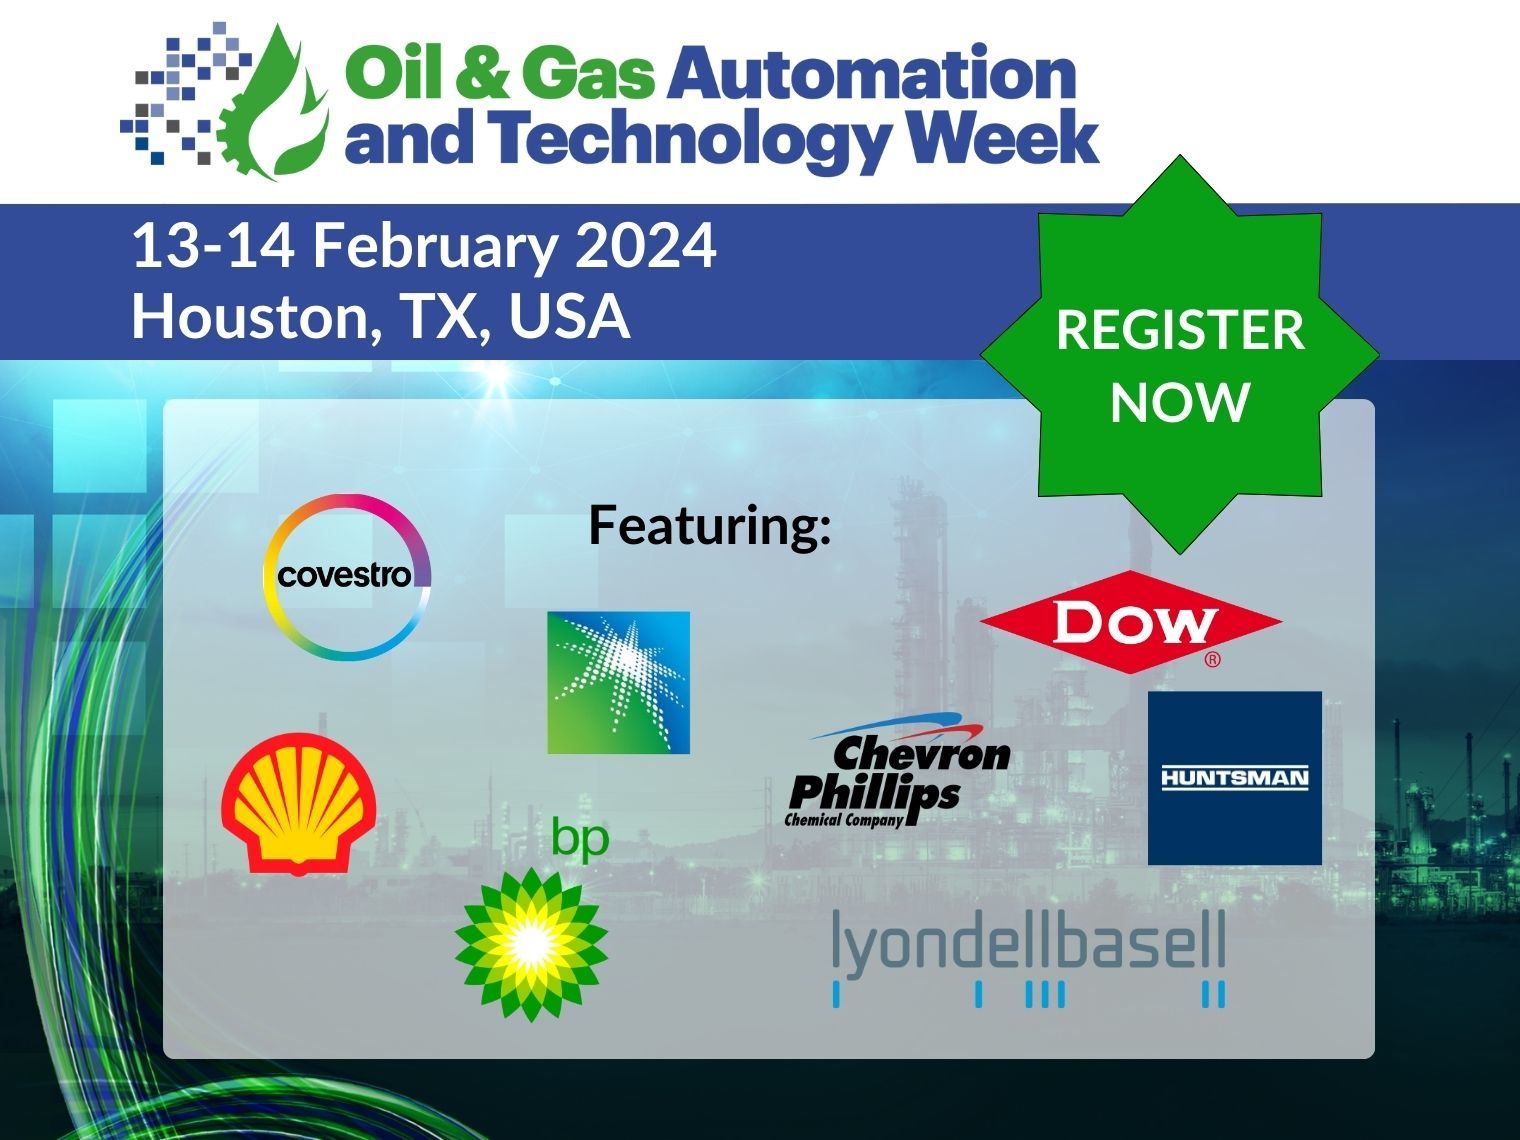 Oil & Gas Automation Technology Week